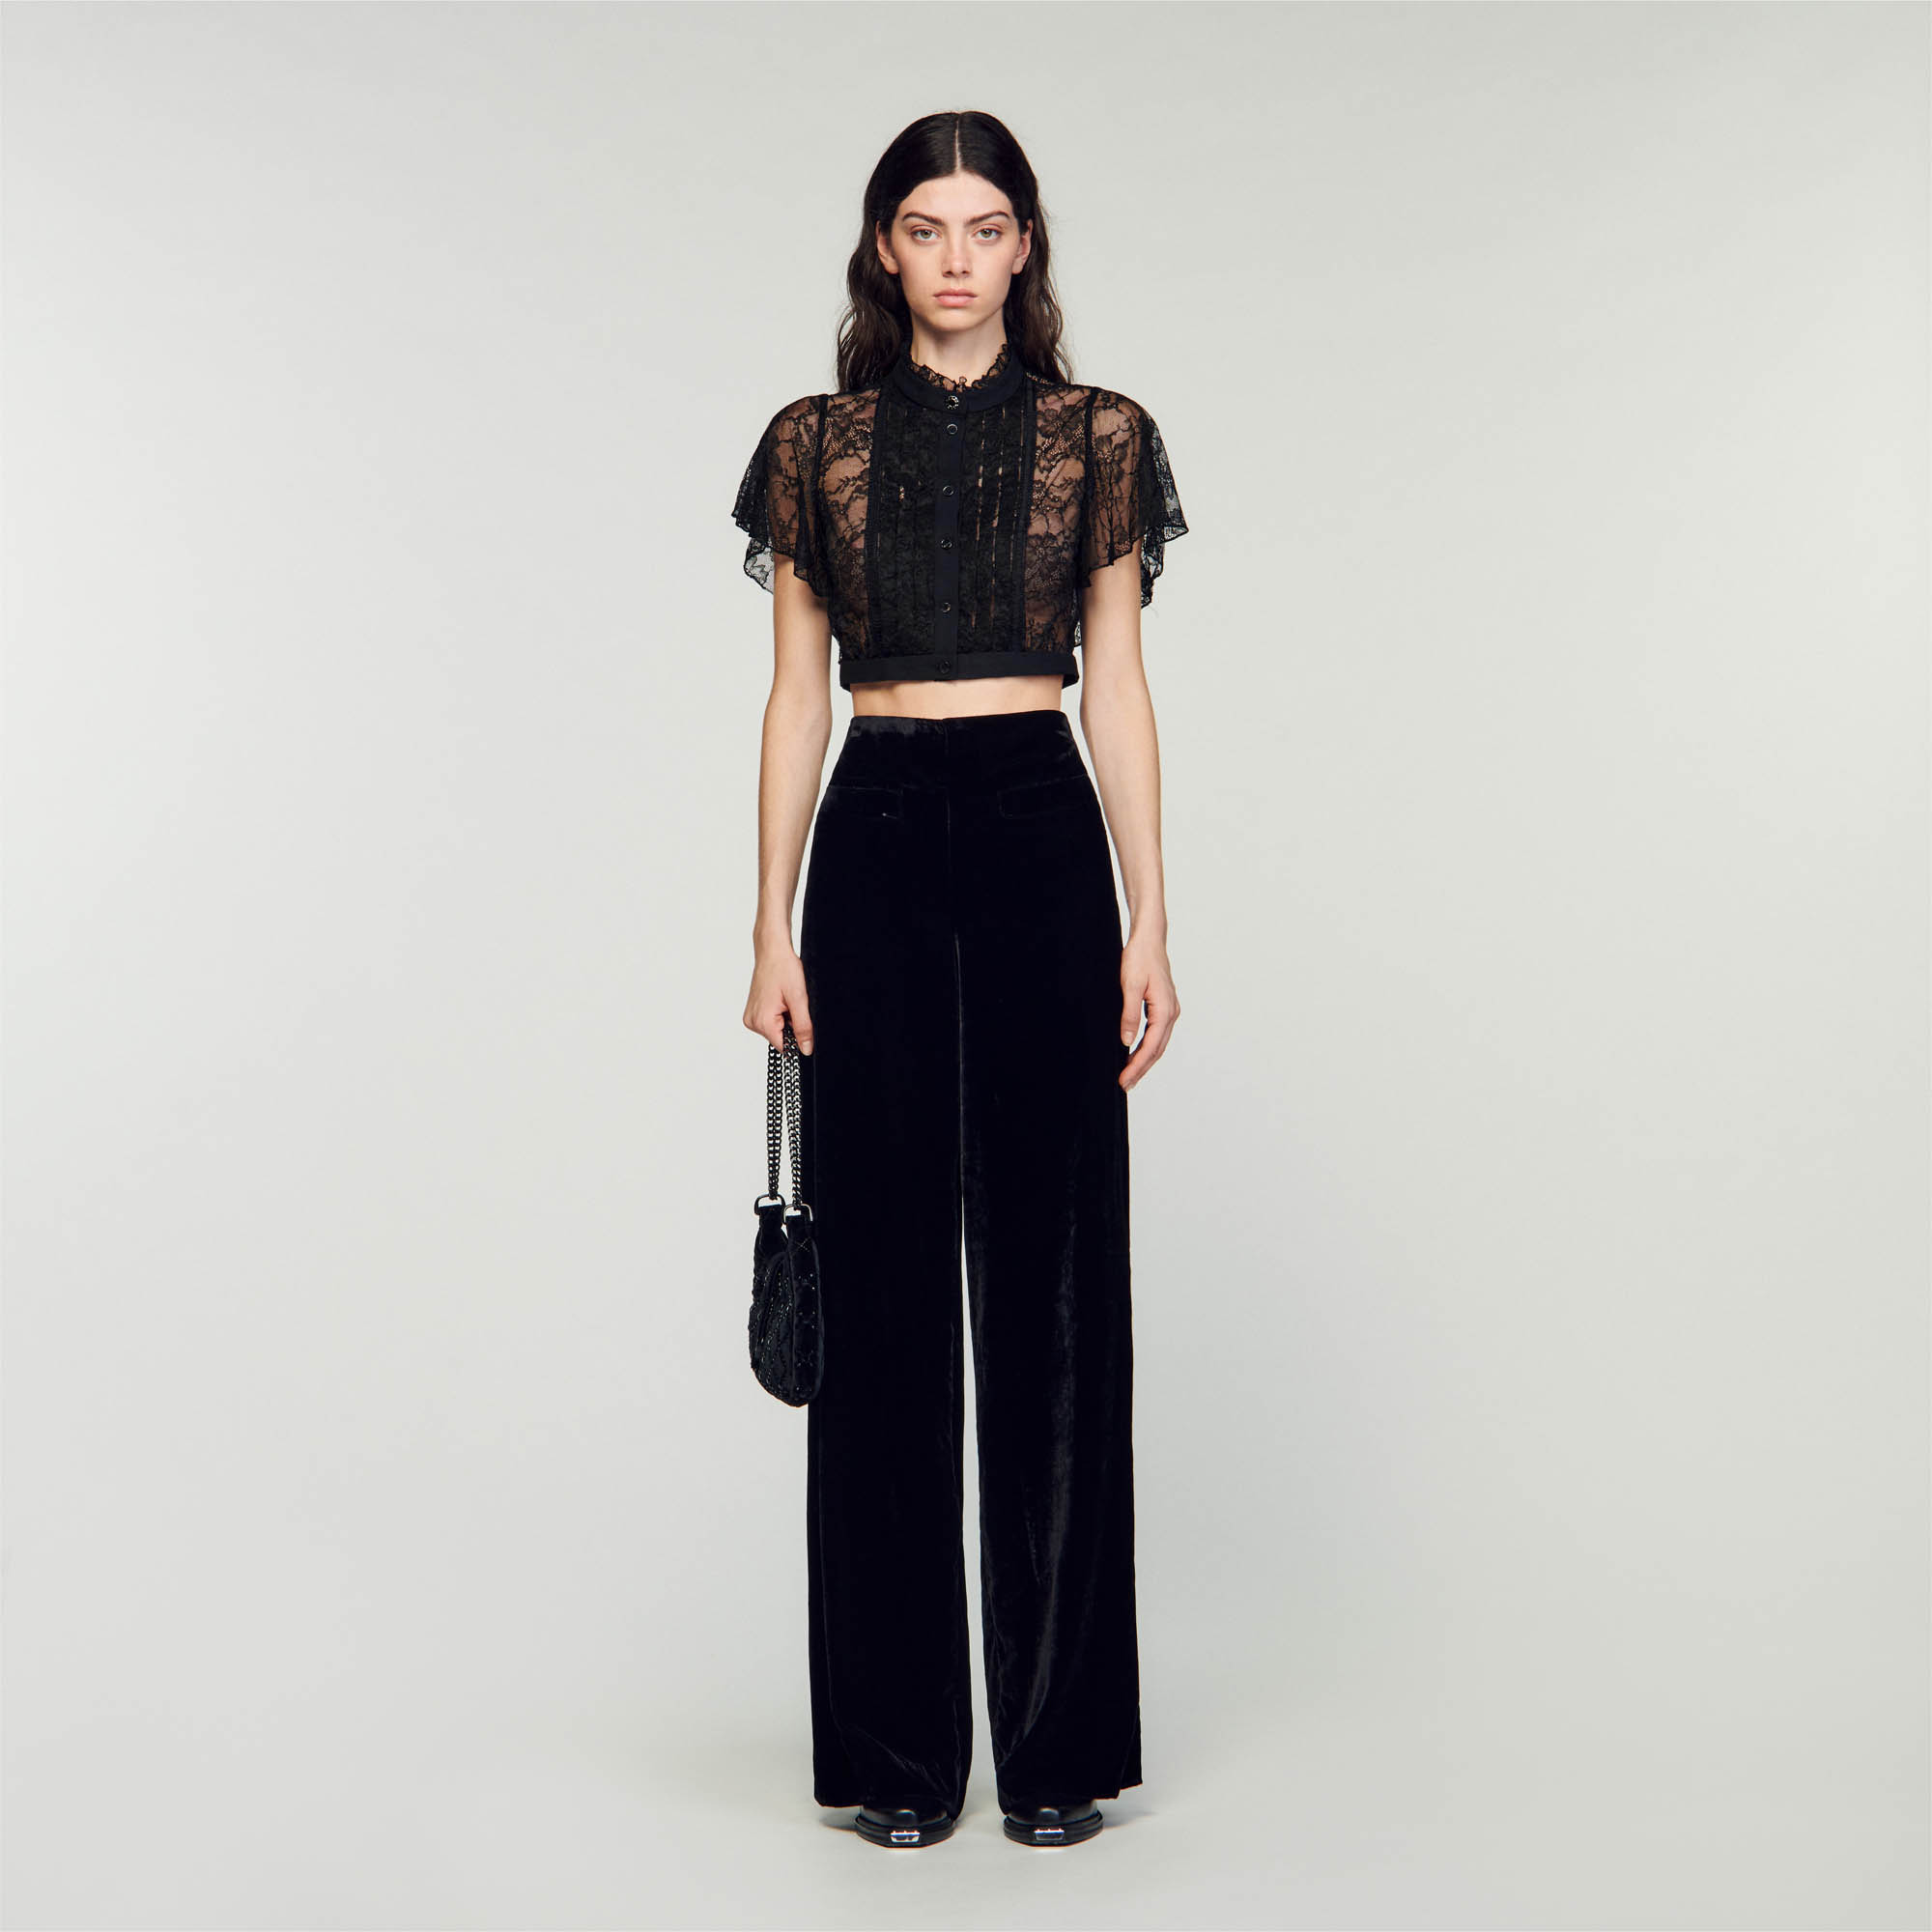 Sandro viscose Wide-leg velvet pants with ironed creases on the front and darts at the back, and piping on the waist